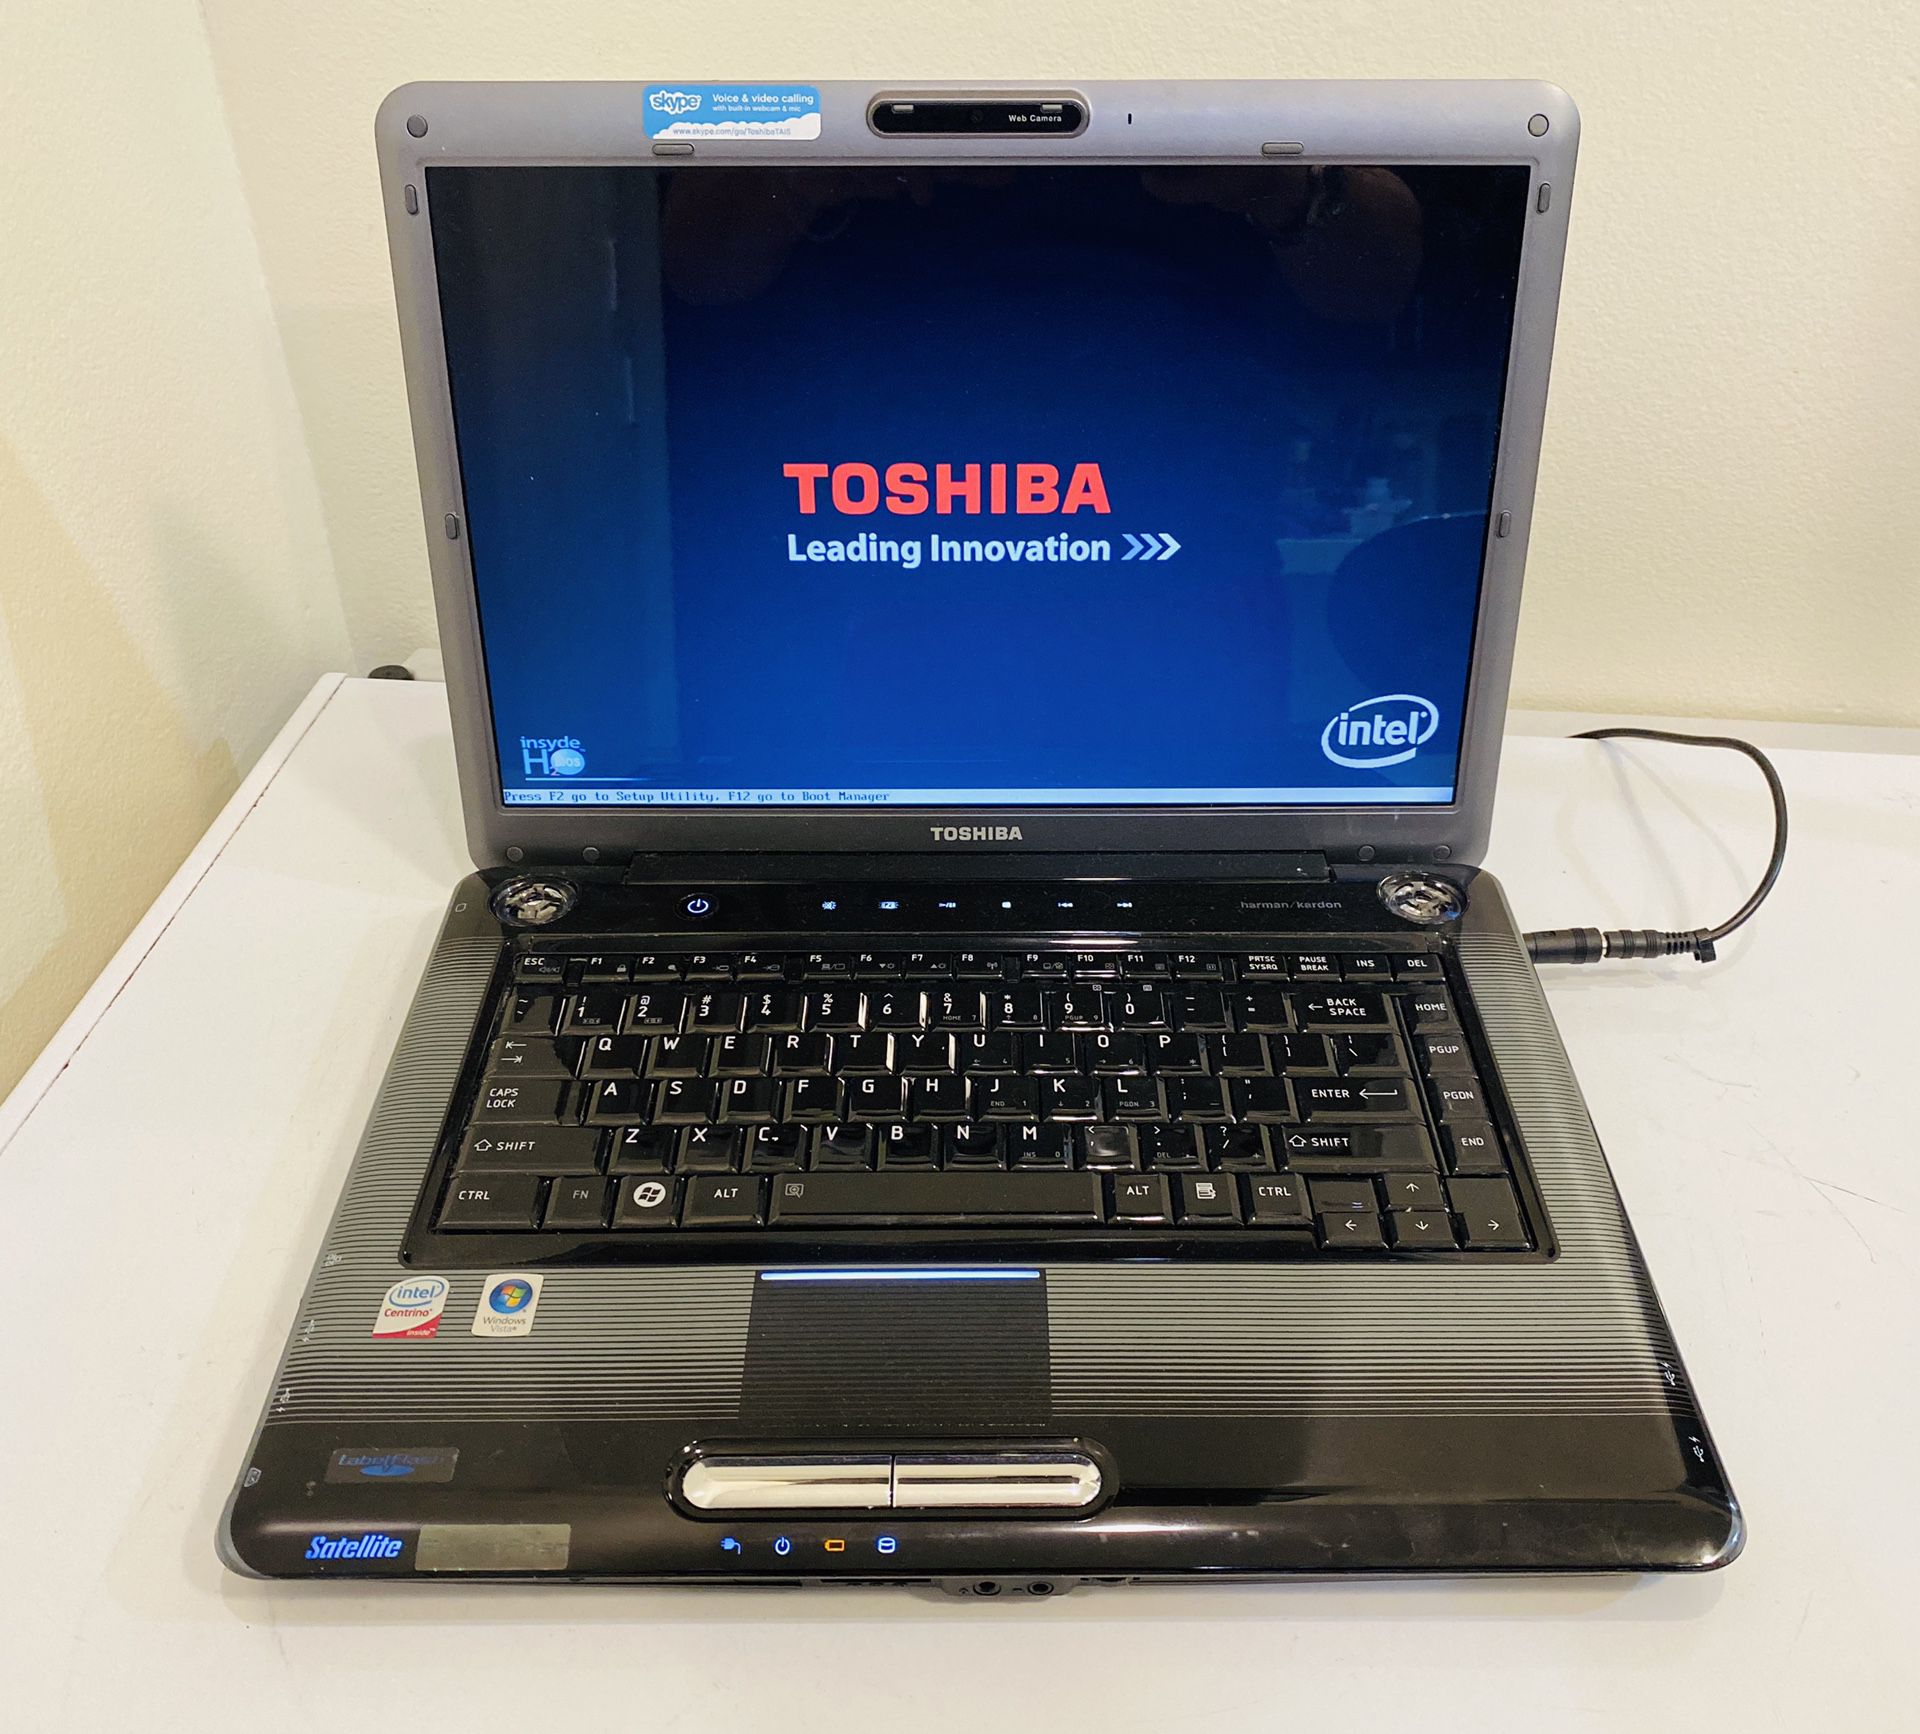 Toshiba LAPTOP Core 2Duo @2,0 GHz, Missing HDD, 2G RAM, Camera, WIFI/DVD/3 USB/VGA/E-SATA/Card Reader/15,5” Screen. Charger. For Parts or to be Fixed